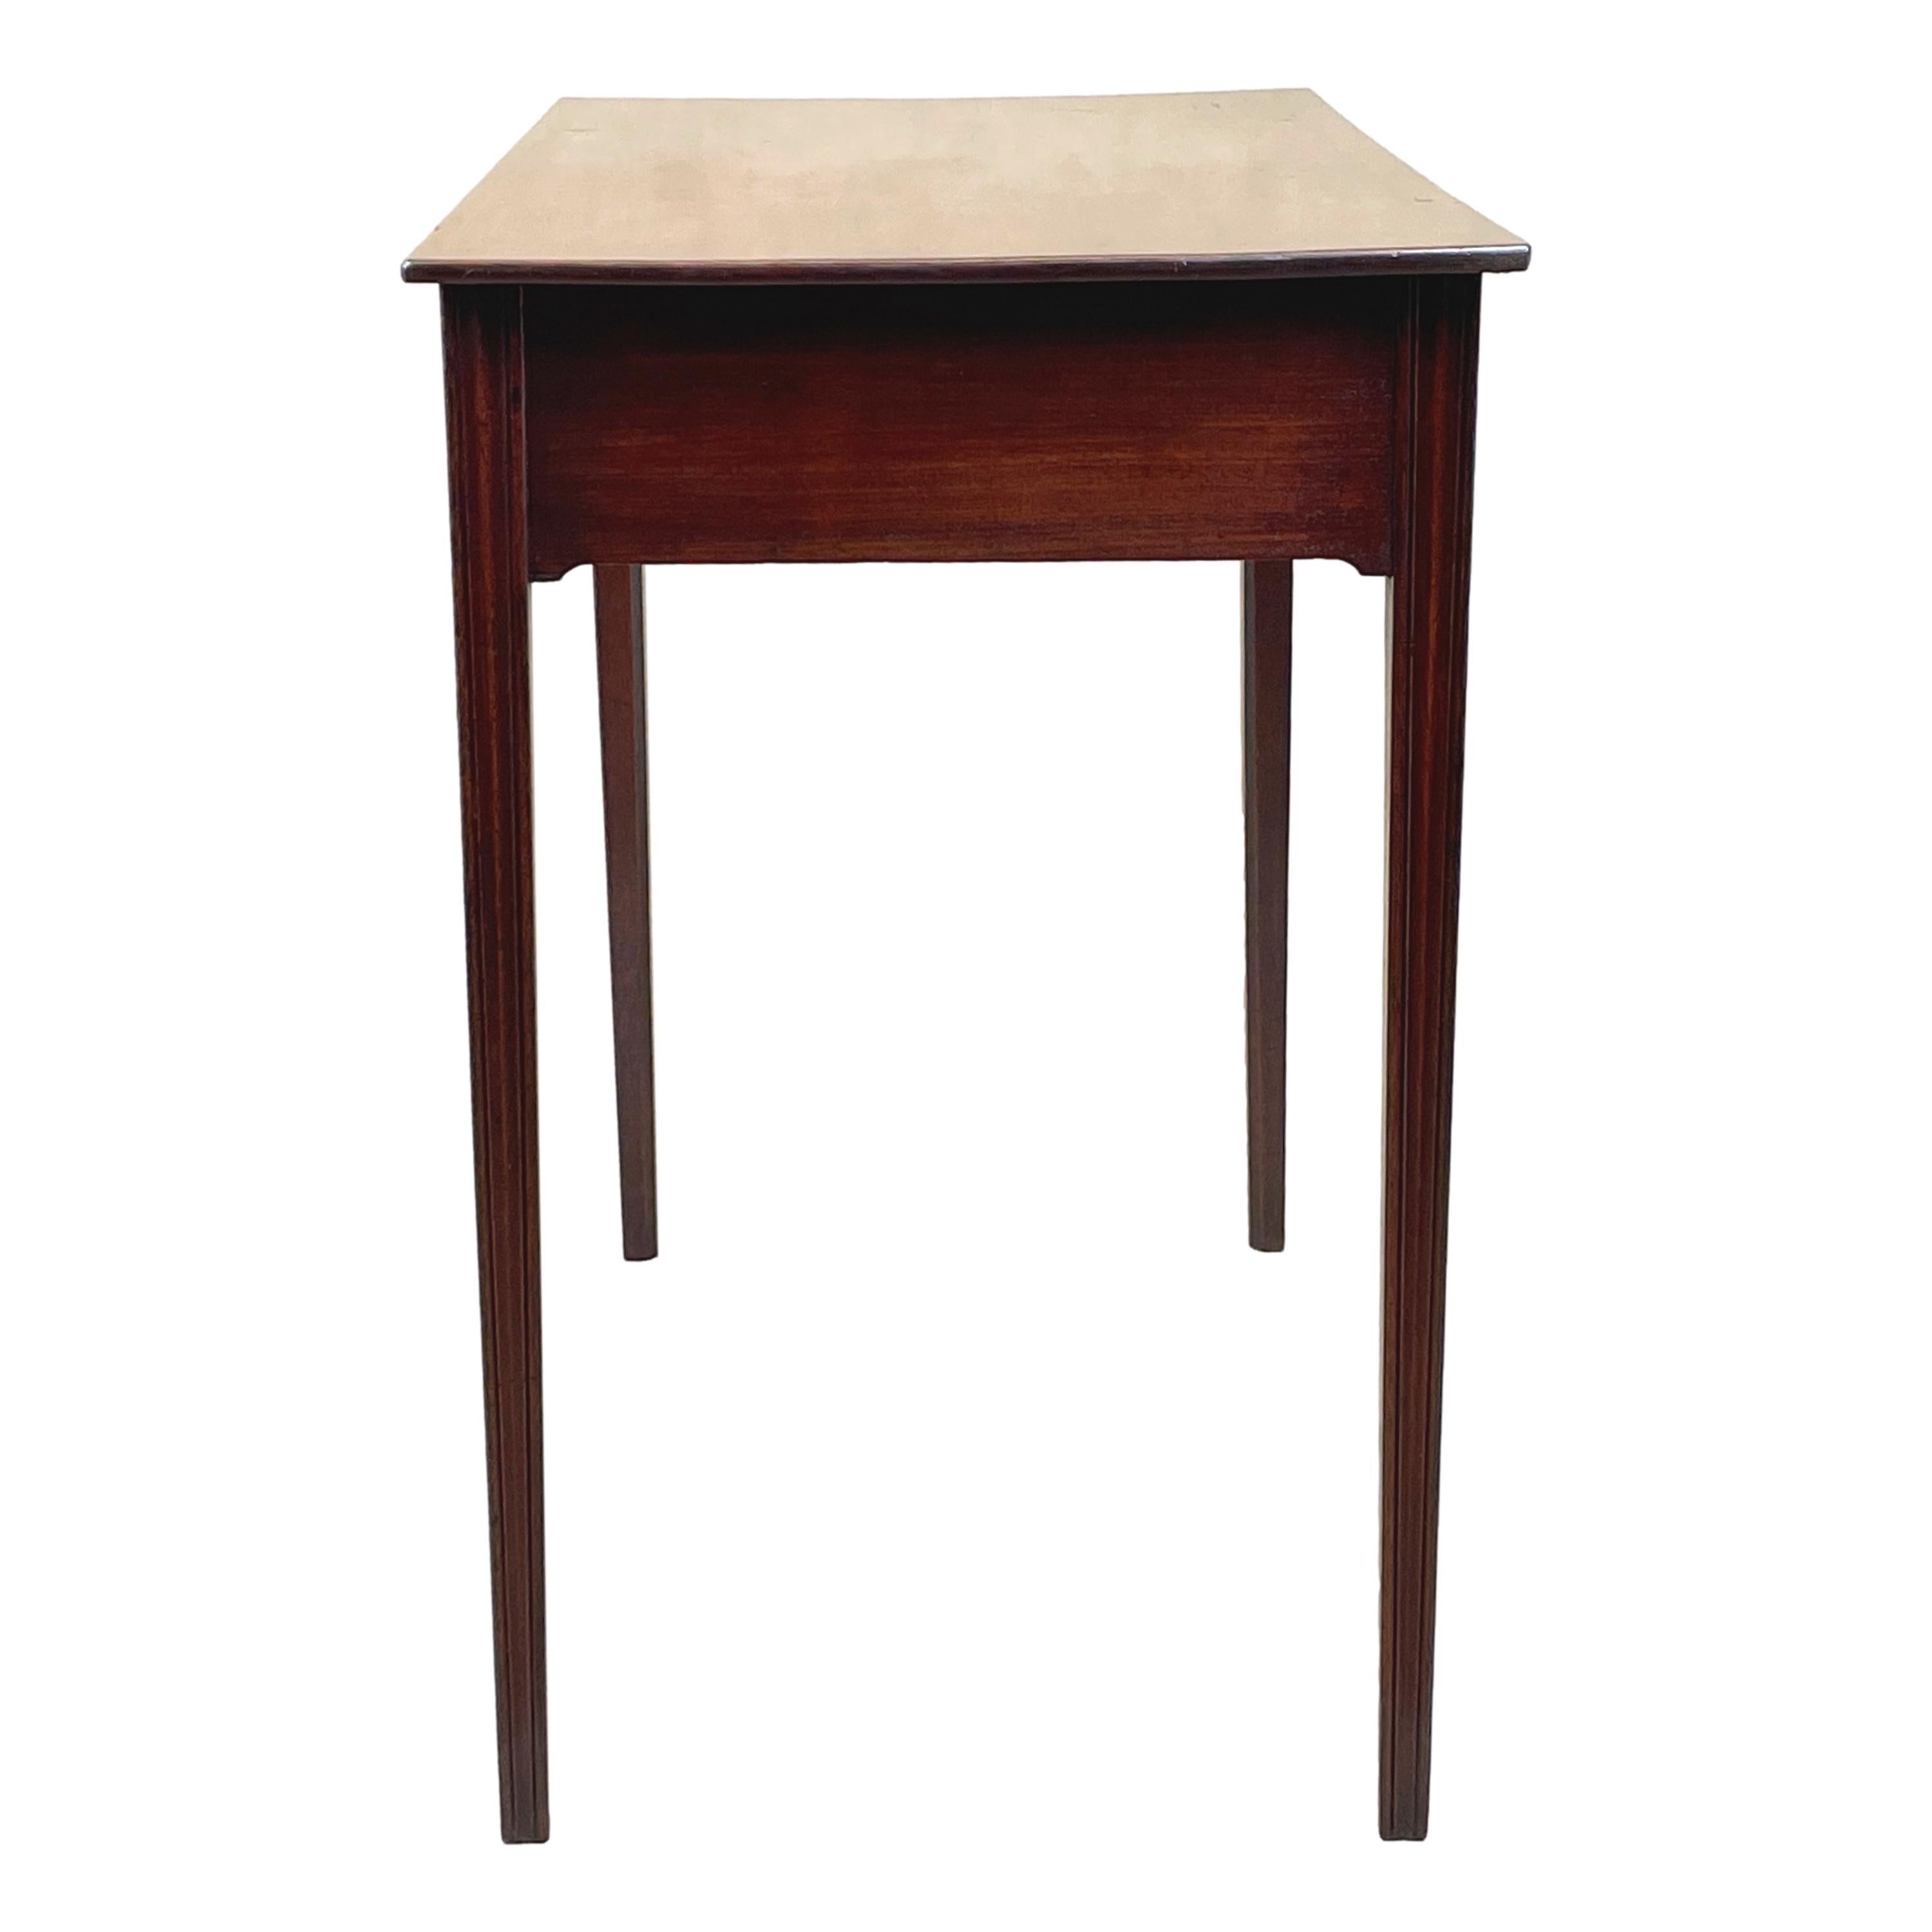 A very attractive and good quality late 18th century Georgian Mahogany side table with well figured top, over three frieze drawers retaining original brass swan neck handles and elegant shaped frieze, raised on square tapered legs.


A fabulous